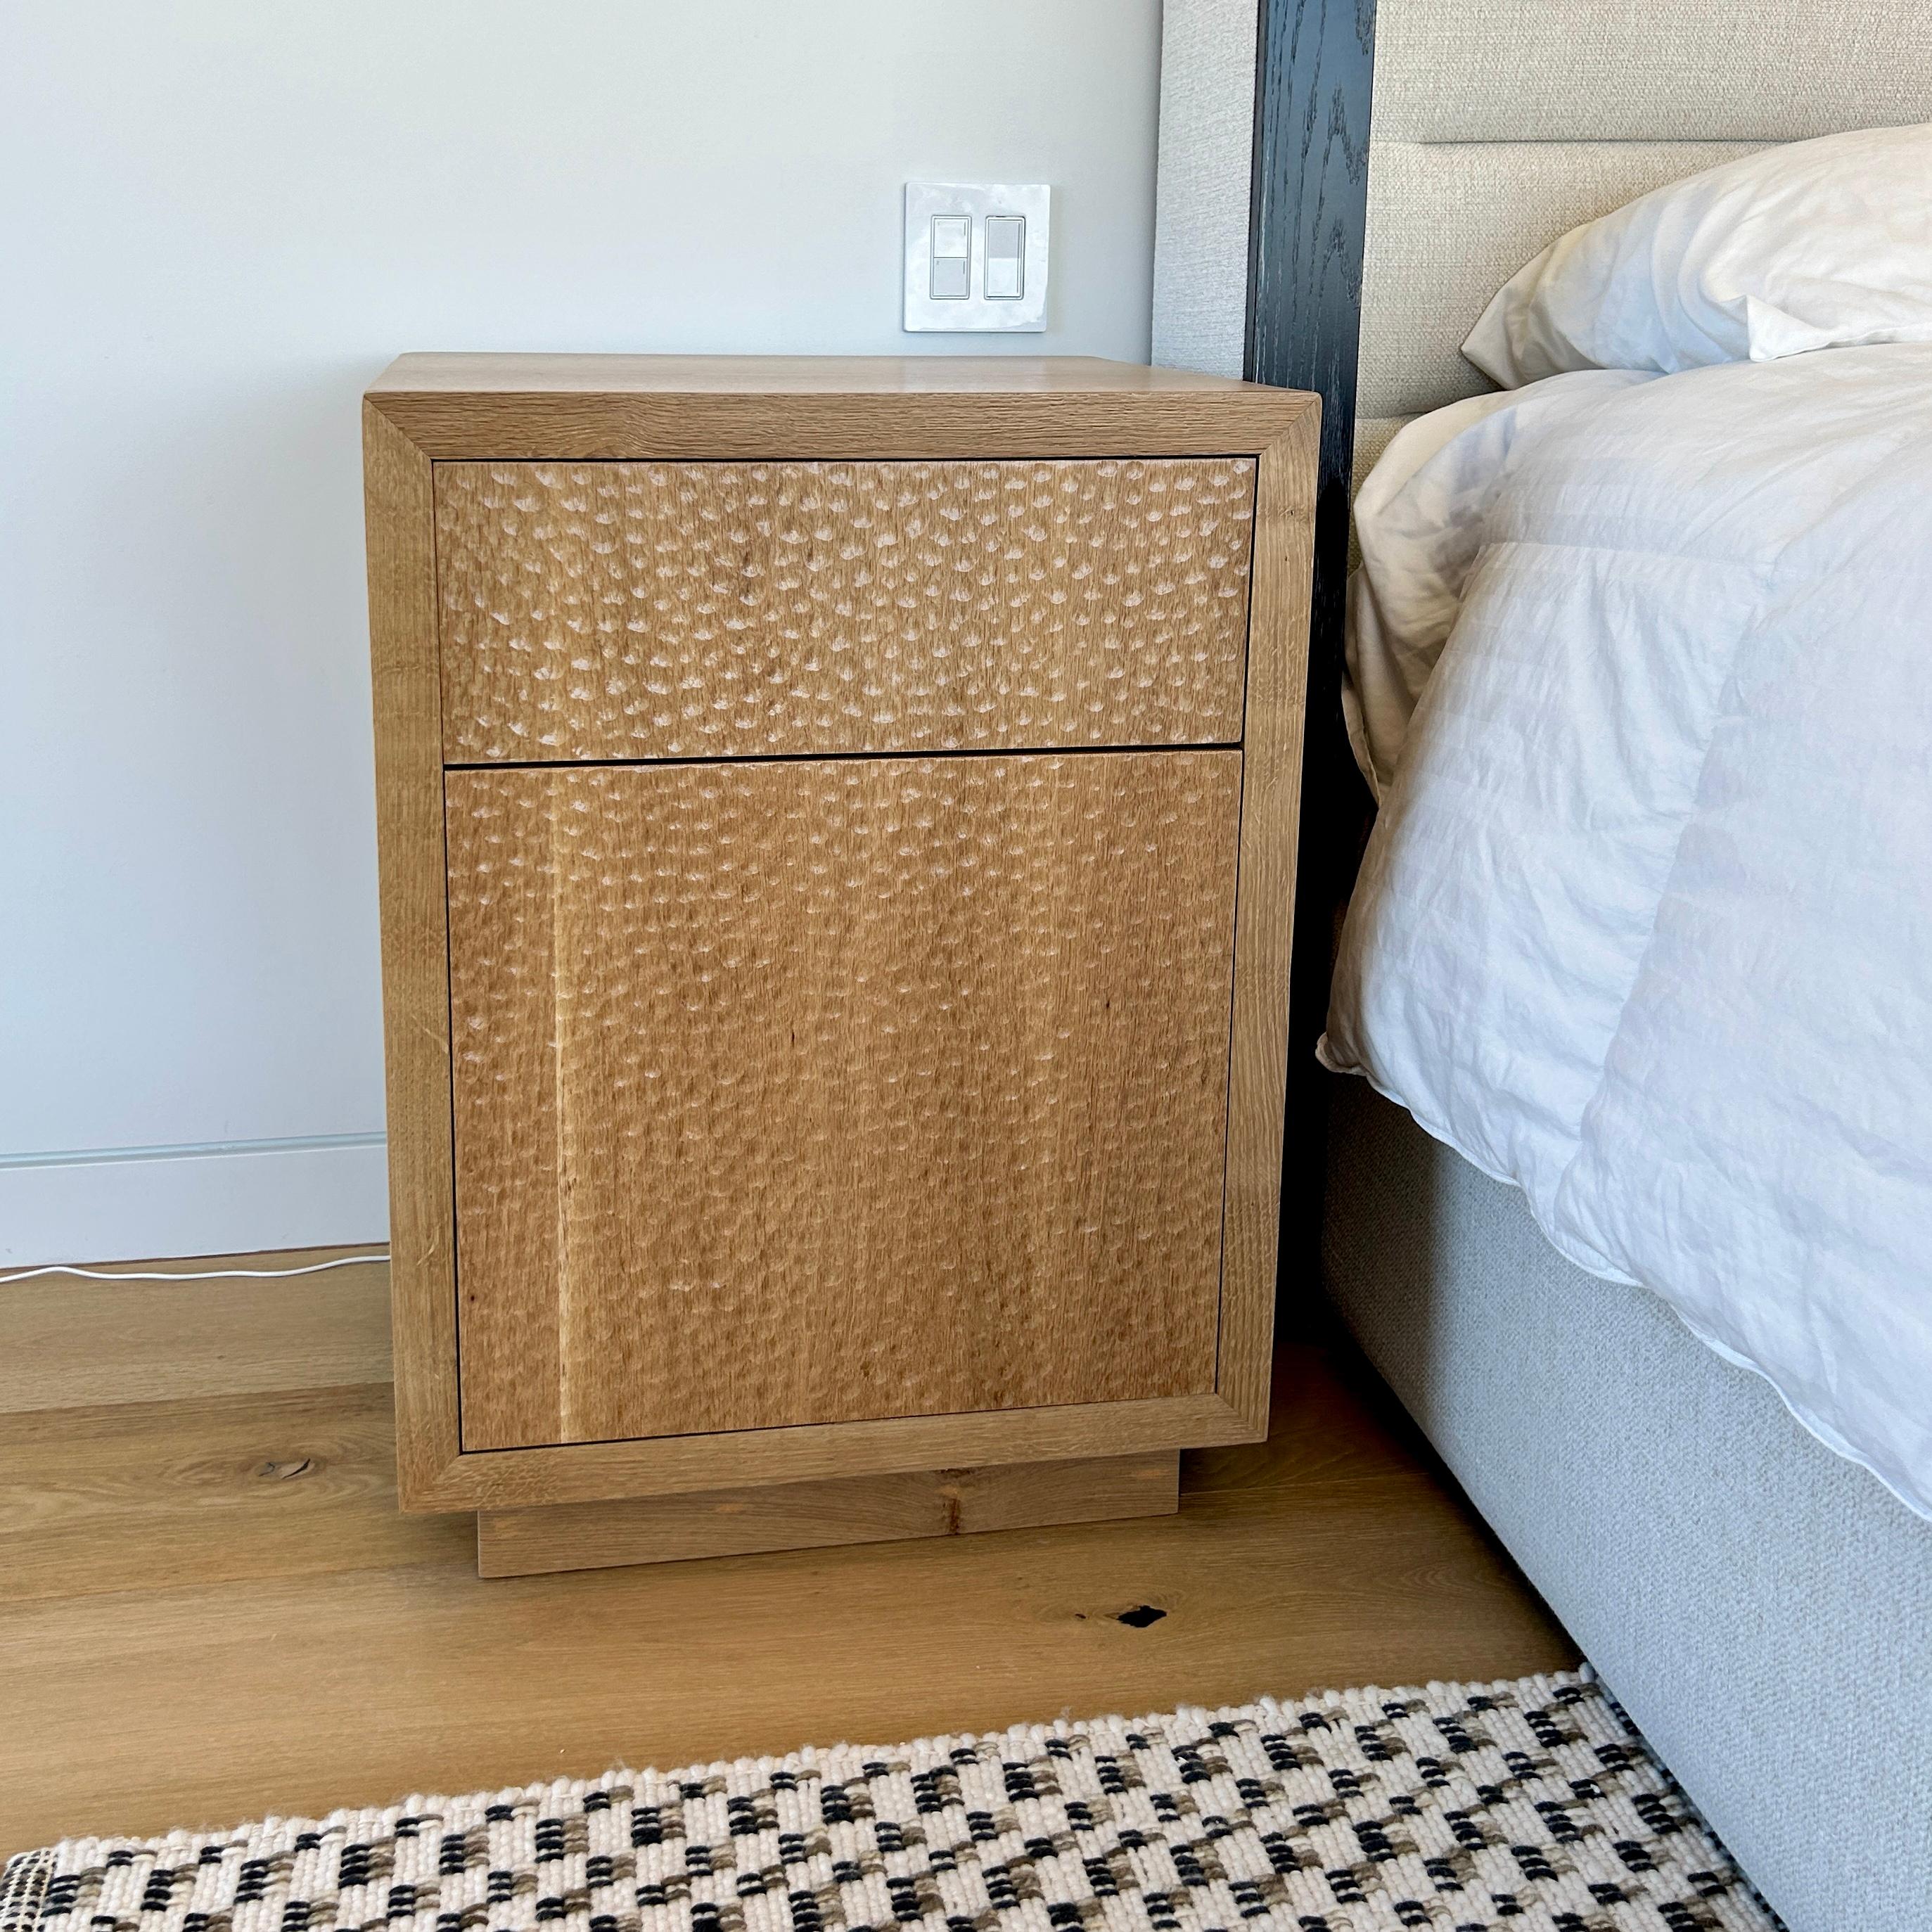 Introducing the Rift Sawn White Oak CPAP Nightstand, a premium addition to your bedroom ensemble. Crafted with meticulous attention to detail, this nightstand boasts an exterior of exquisite rift sawn white oak, adorned with captivating hand-gouged